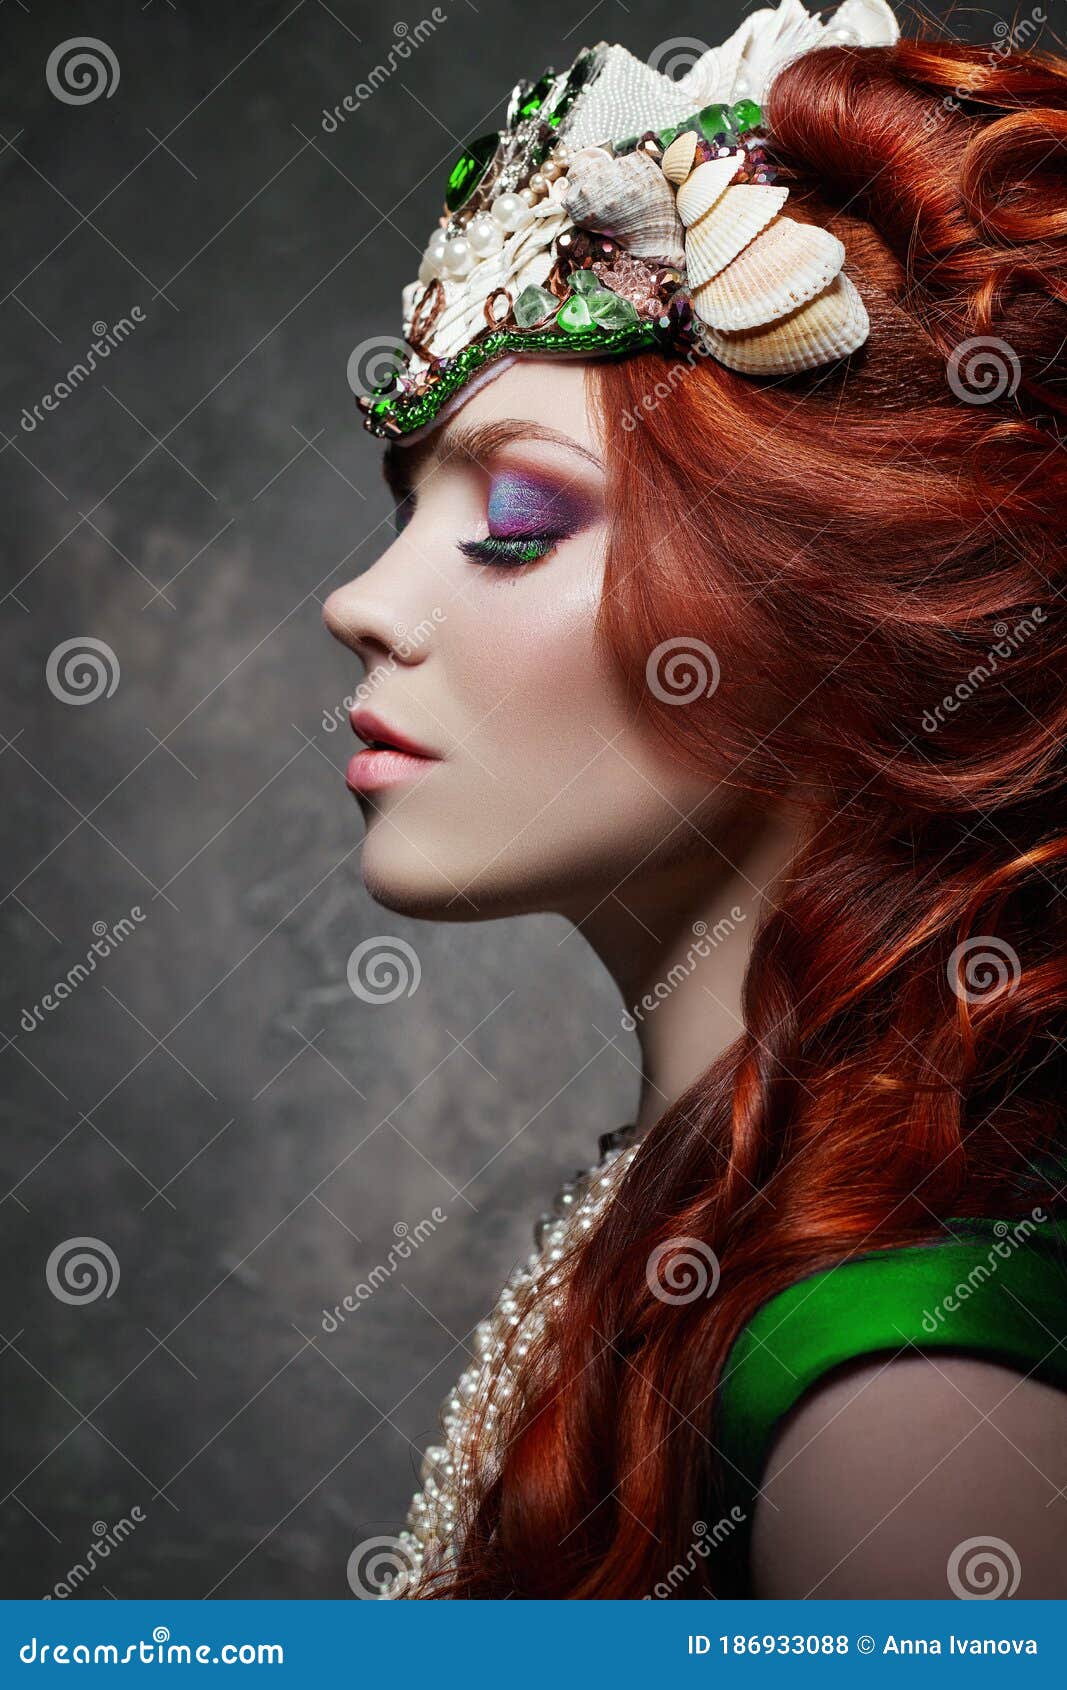 Redhead Girl Fabulous Look, Green Long Dress, Bright Makeup and Big  Eyelashes. Mysterious Fairy Woman with Red Hair Stock Photo - Image of  care, lipstick: 186933088